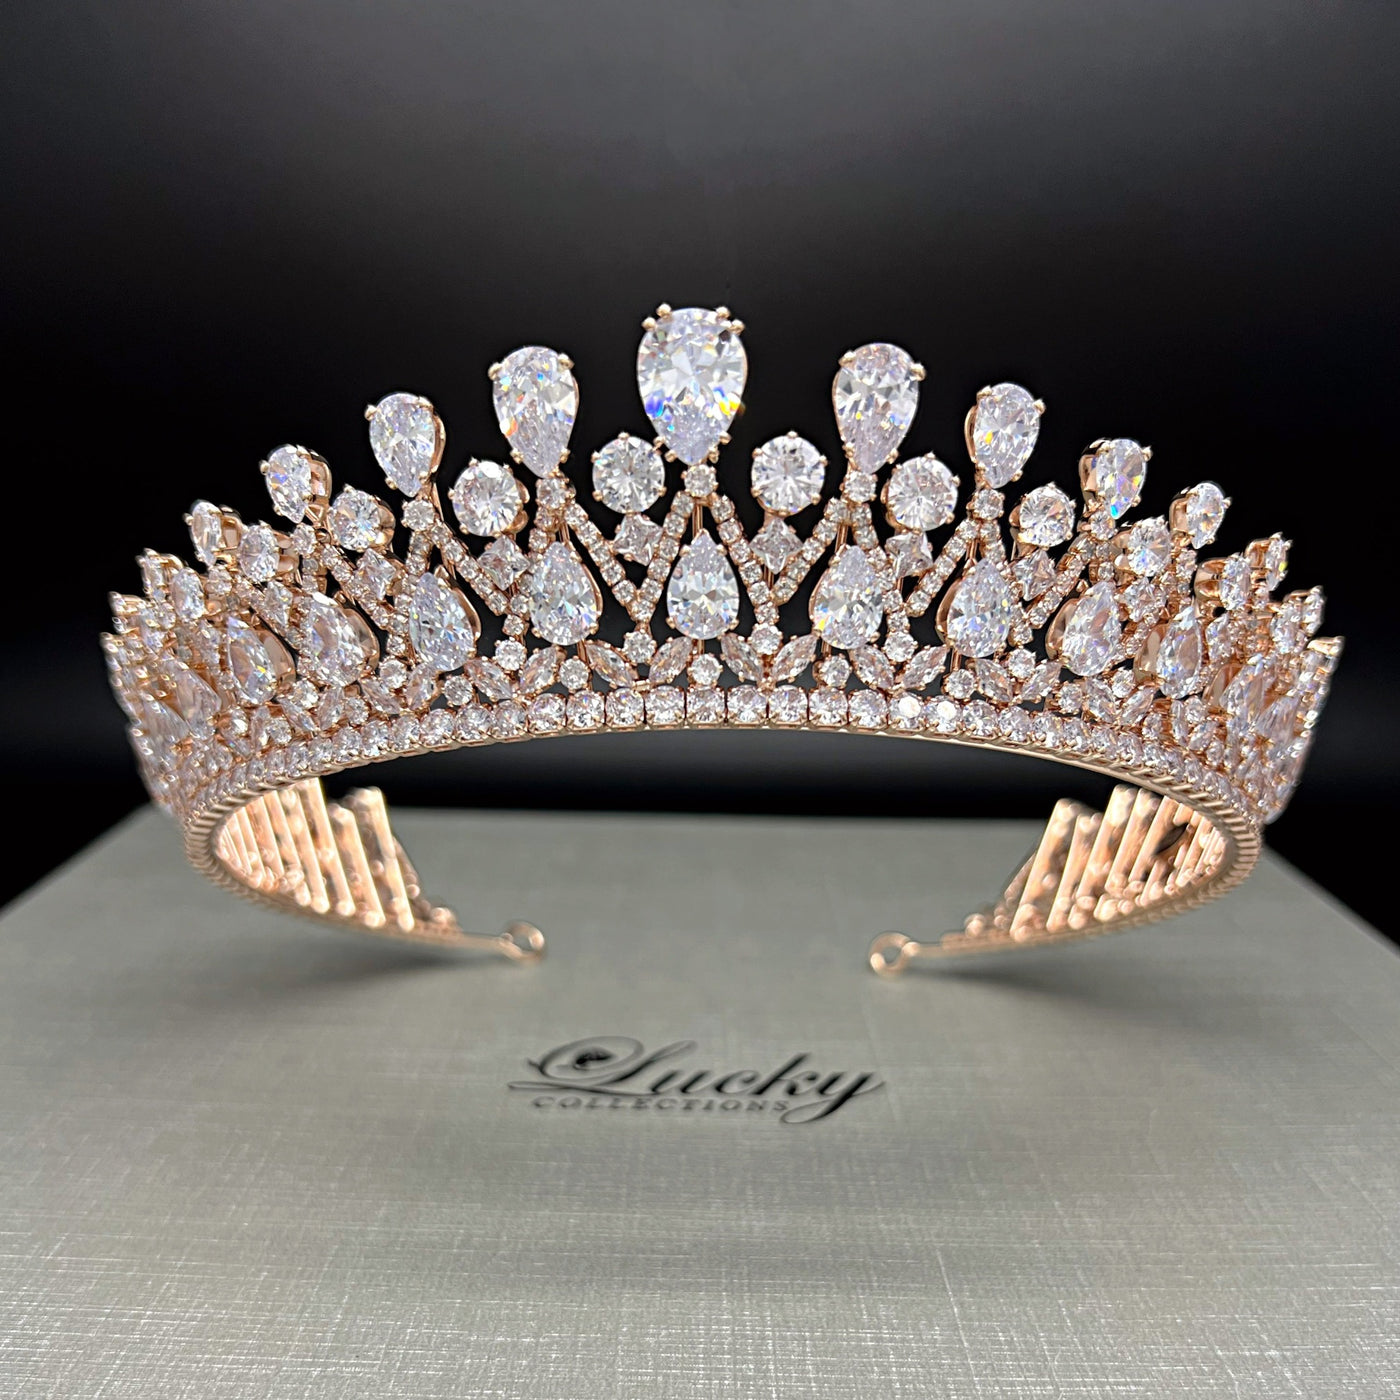 Queen Tiara for Bride, Crown for Quince, Timeless Classic Corona